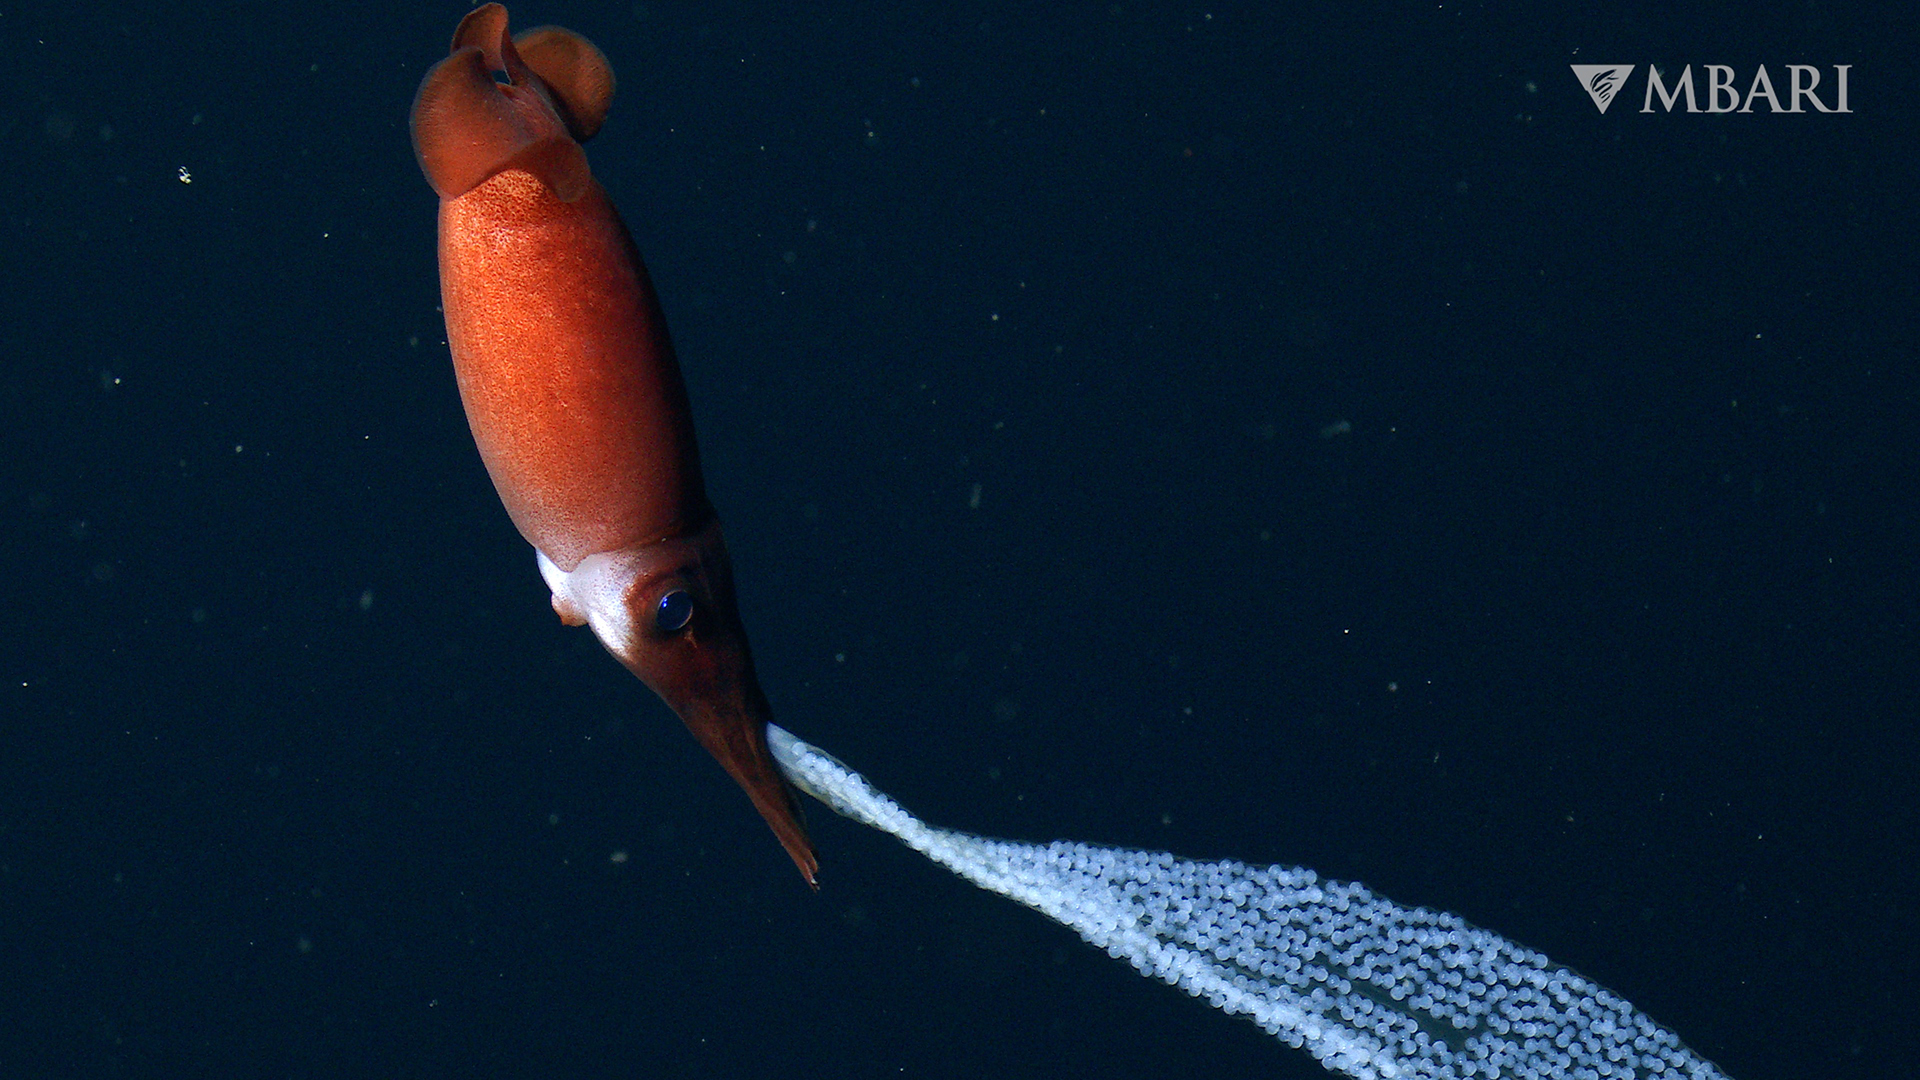 The deep-sea squid mom carrying her eggs in a gelatinous string behind her.